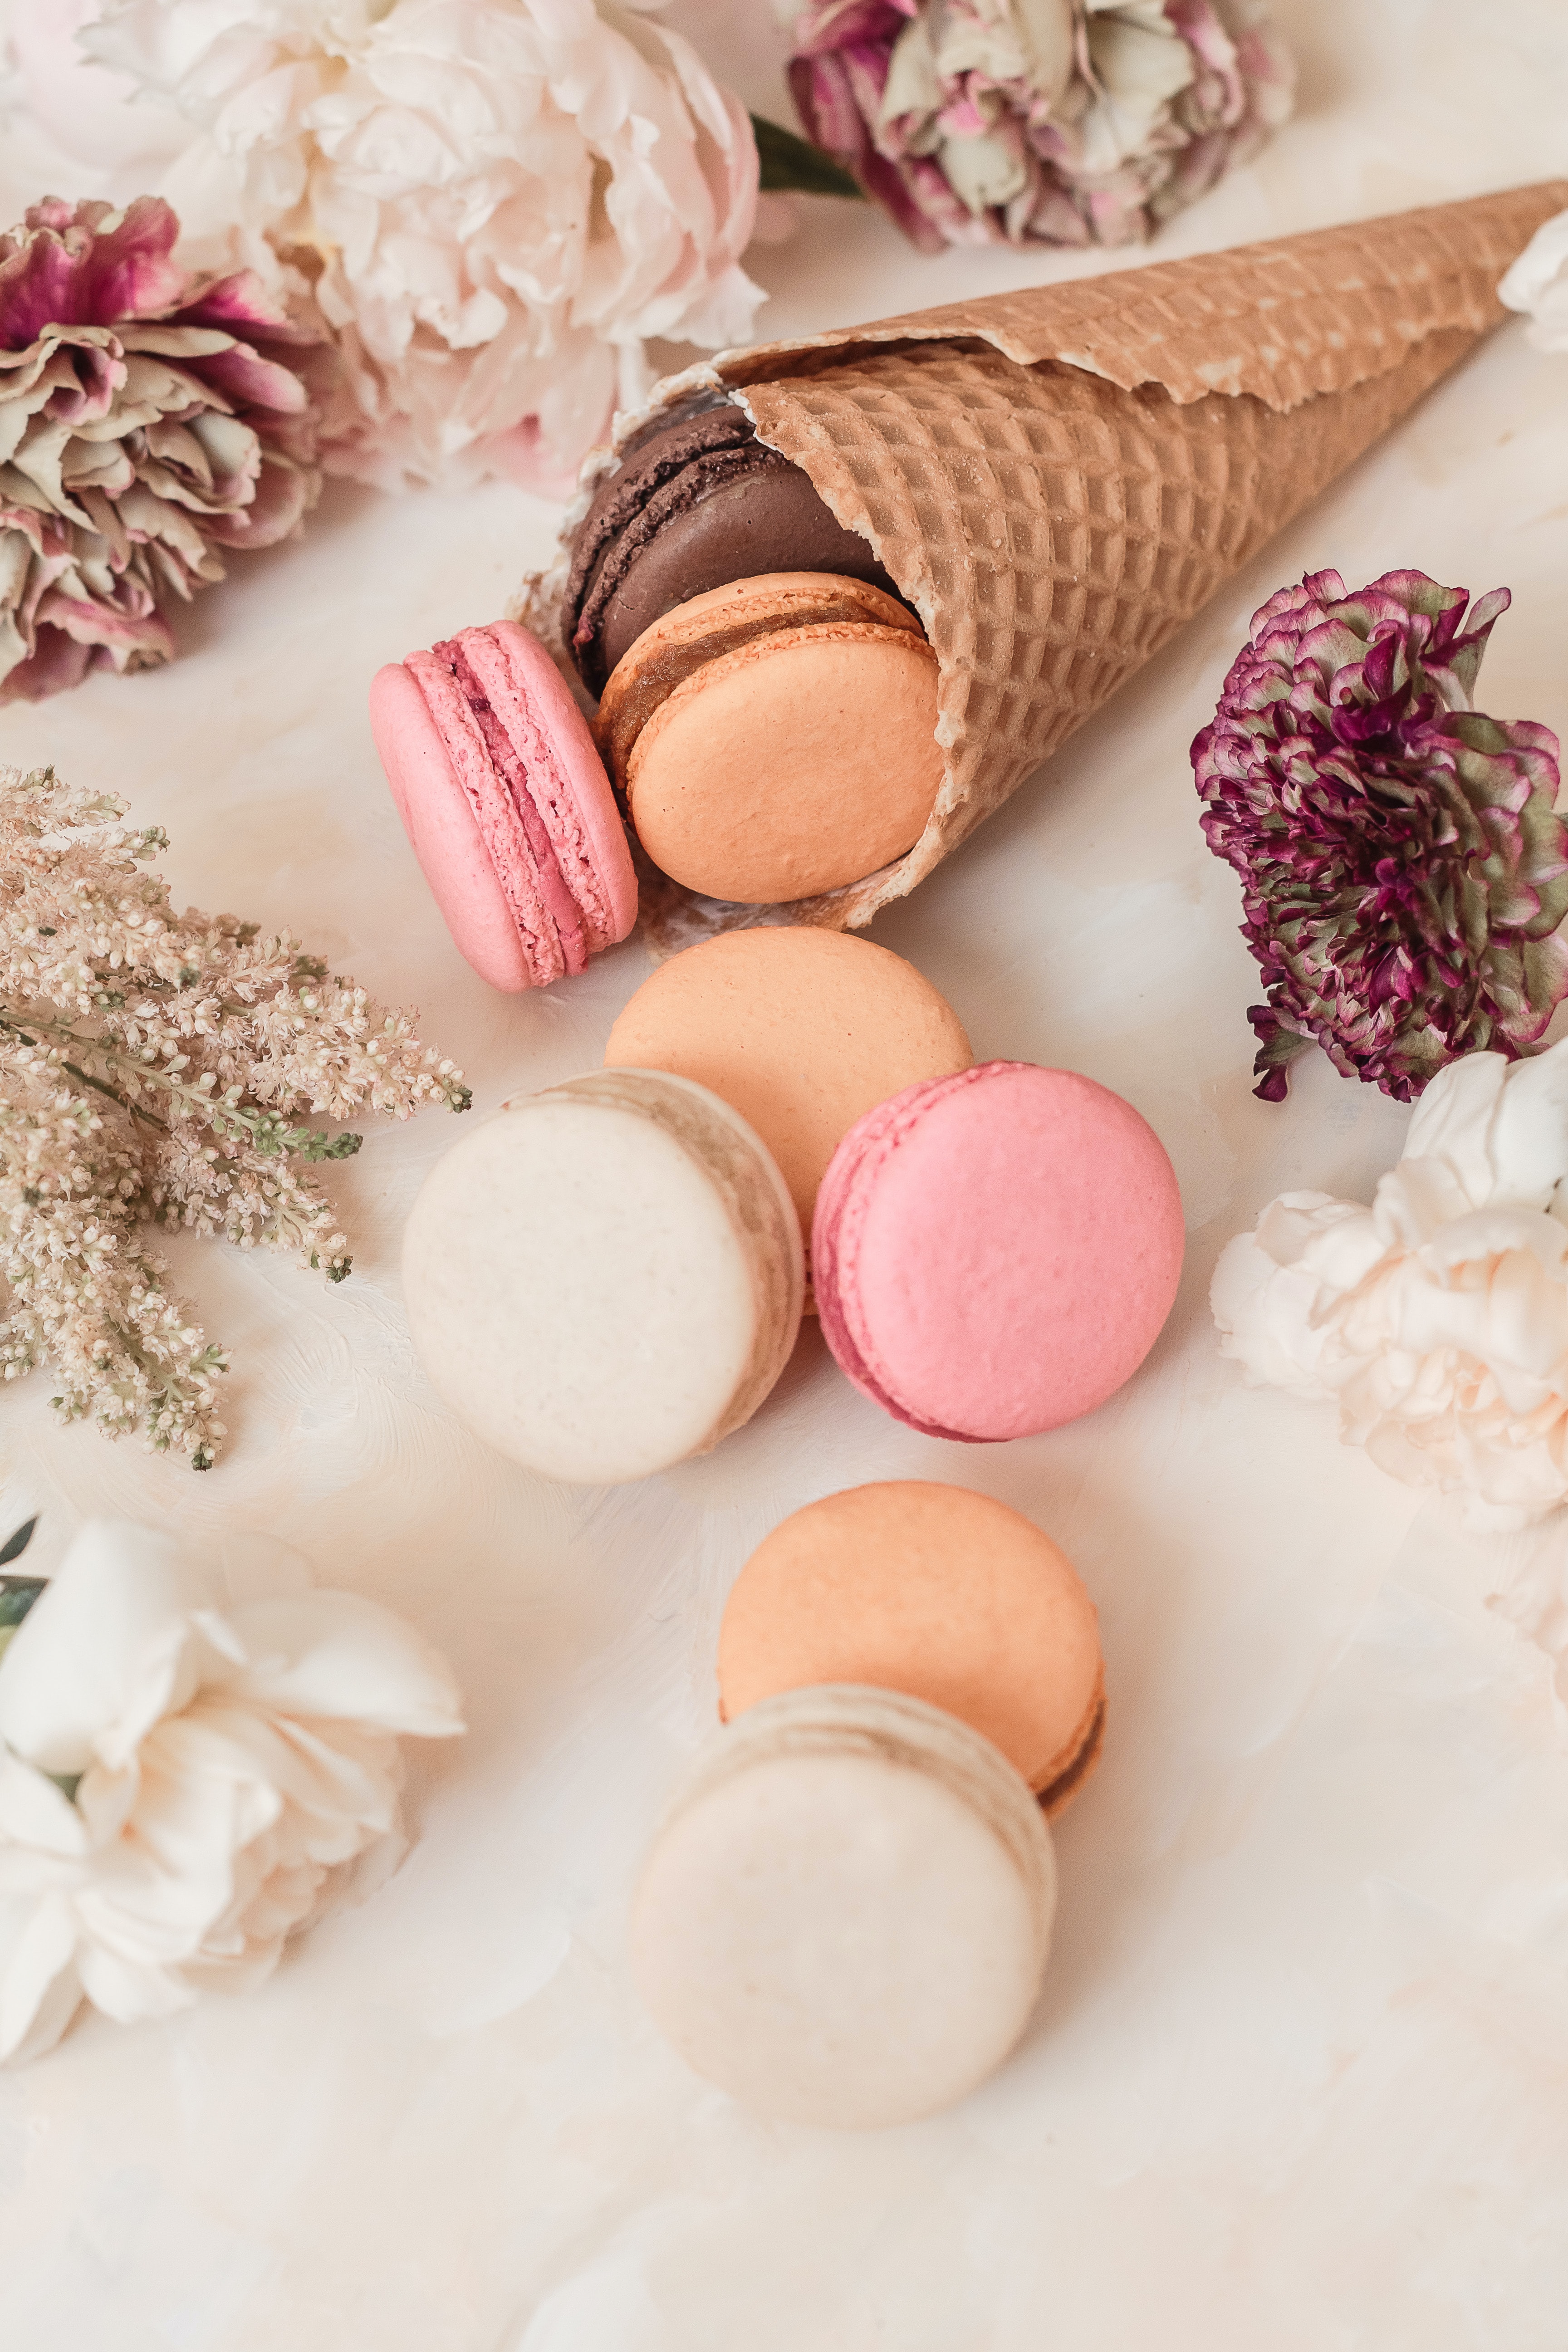 Popular Macaroons Image for Phone